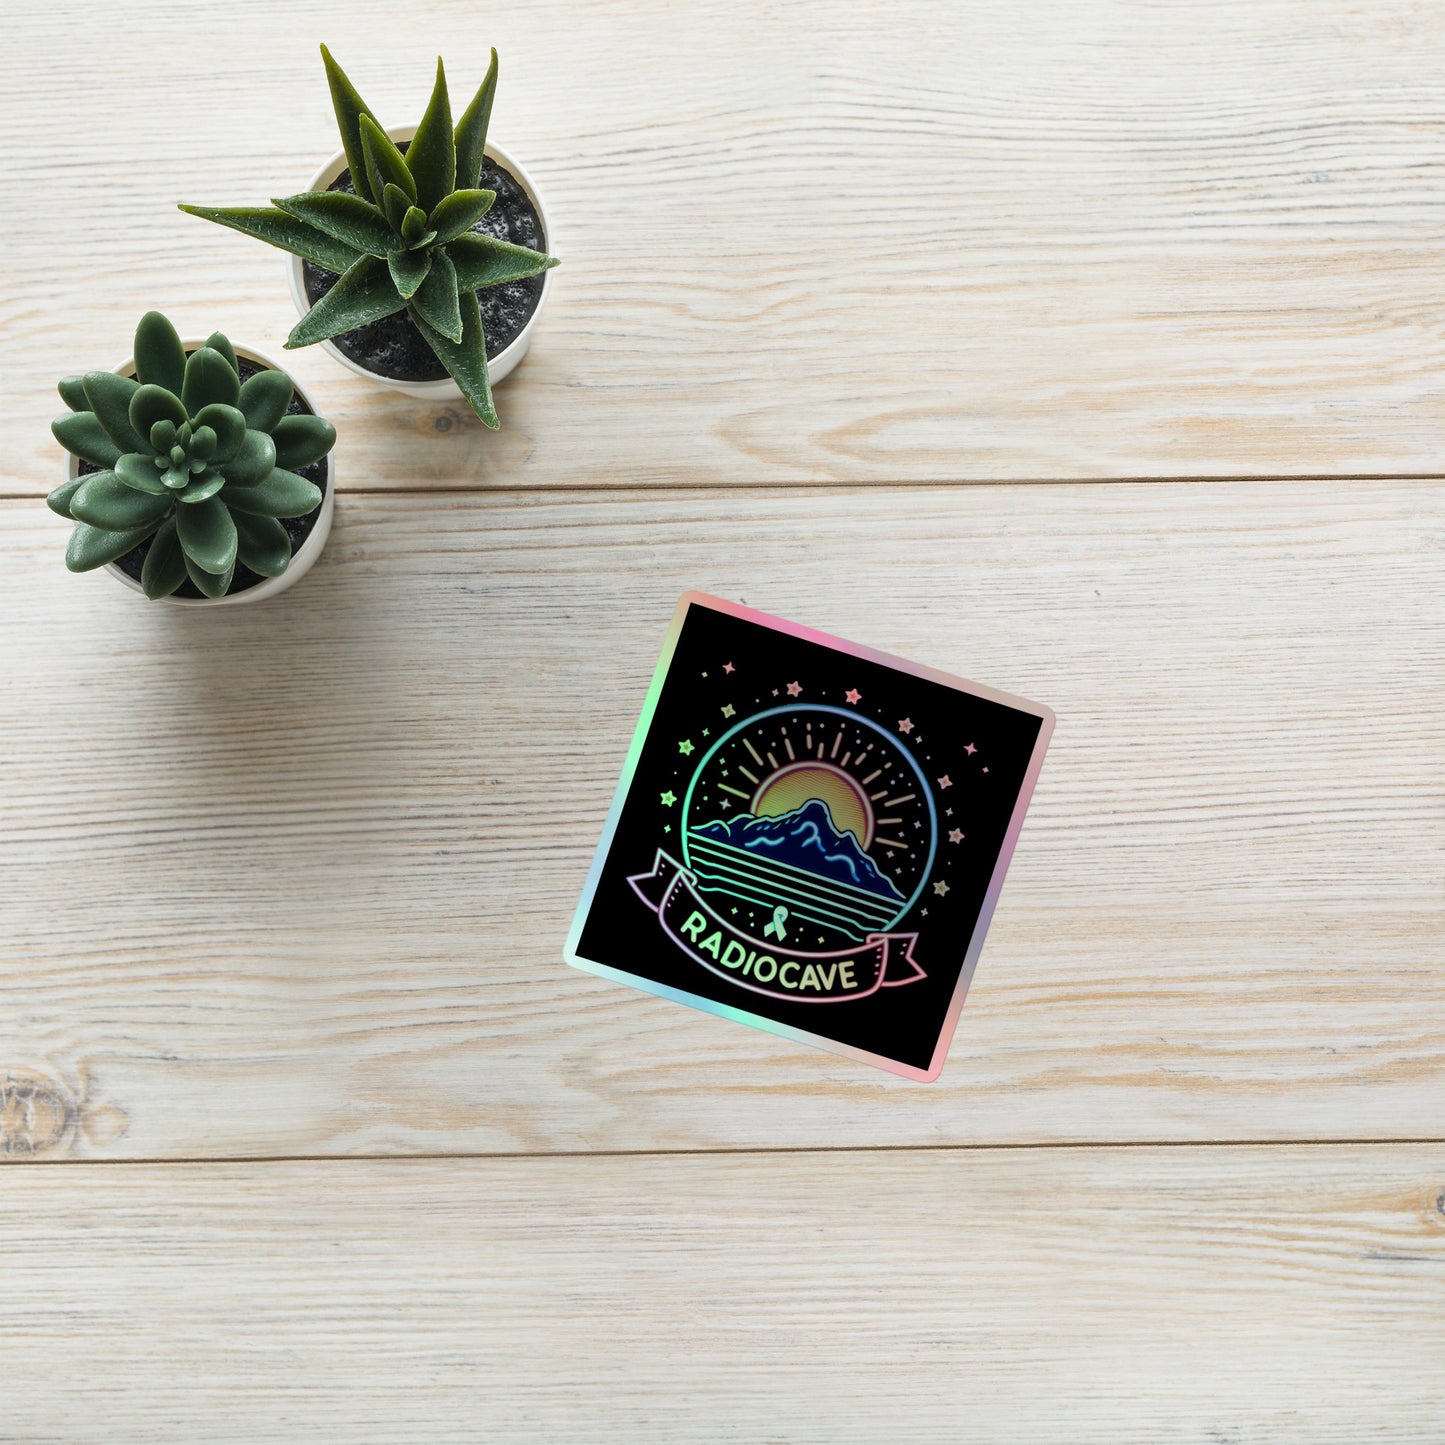 RadioCave Holographic stickers